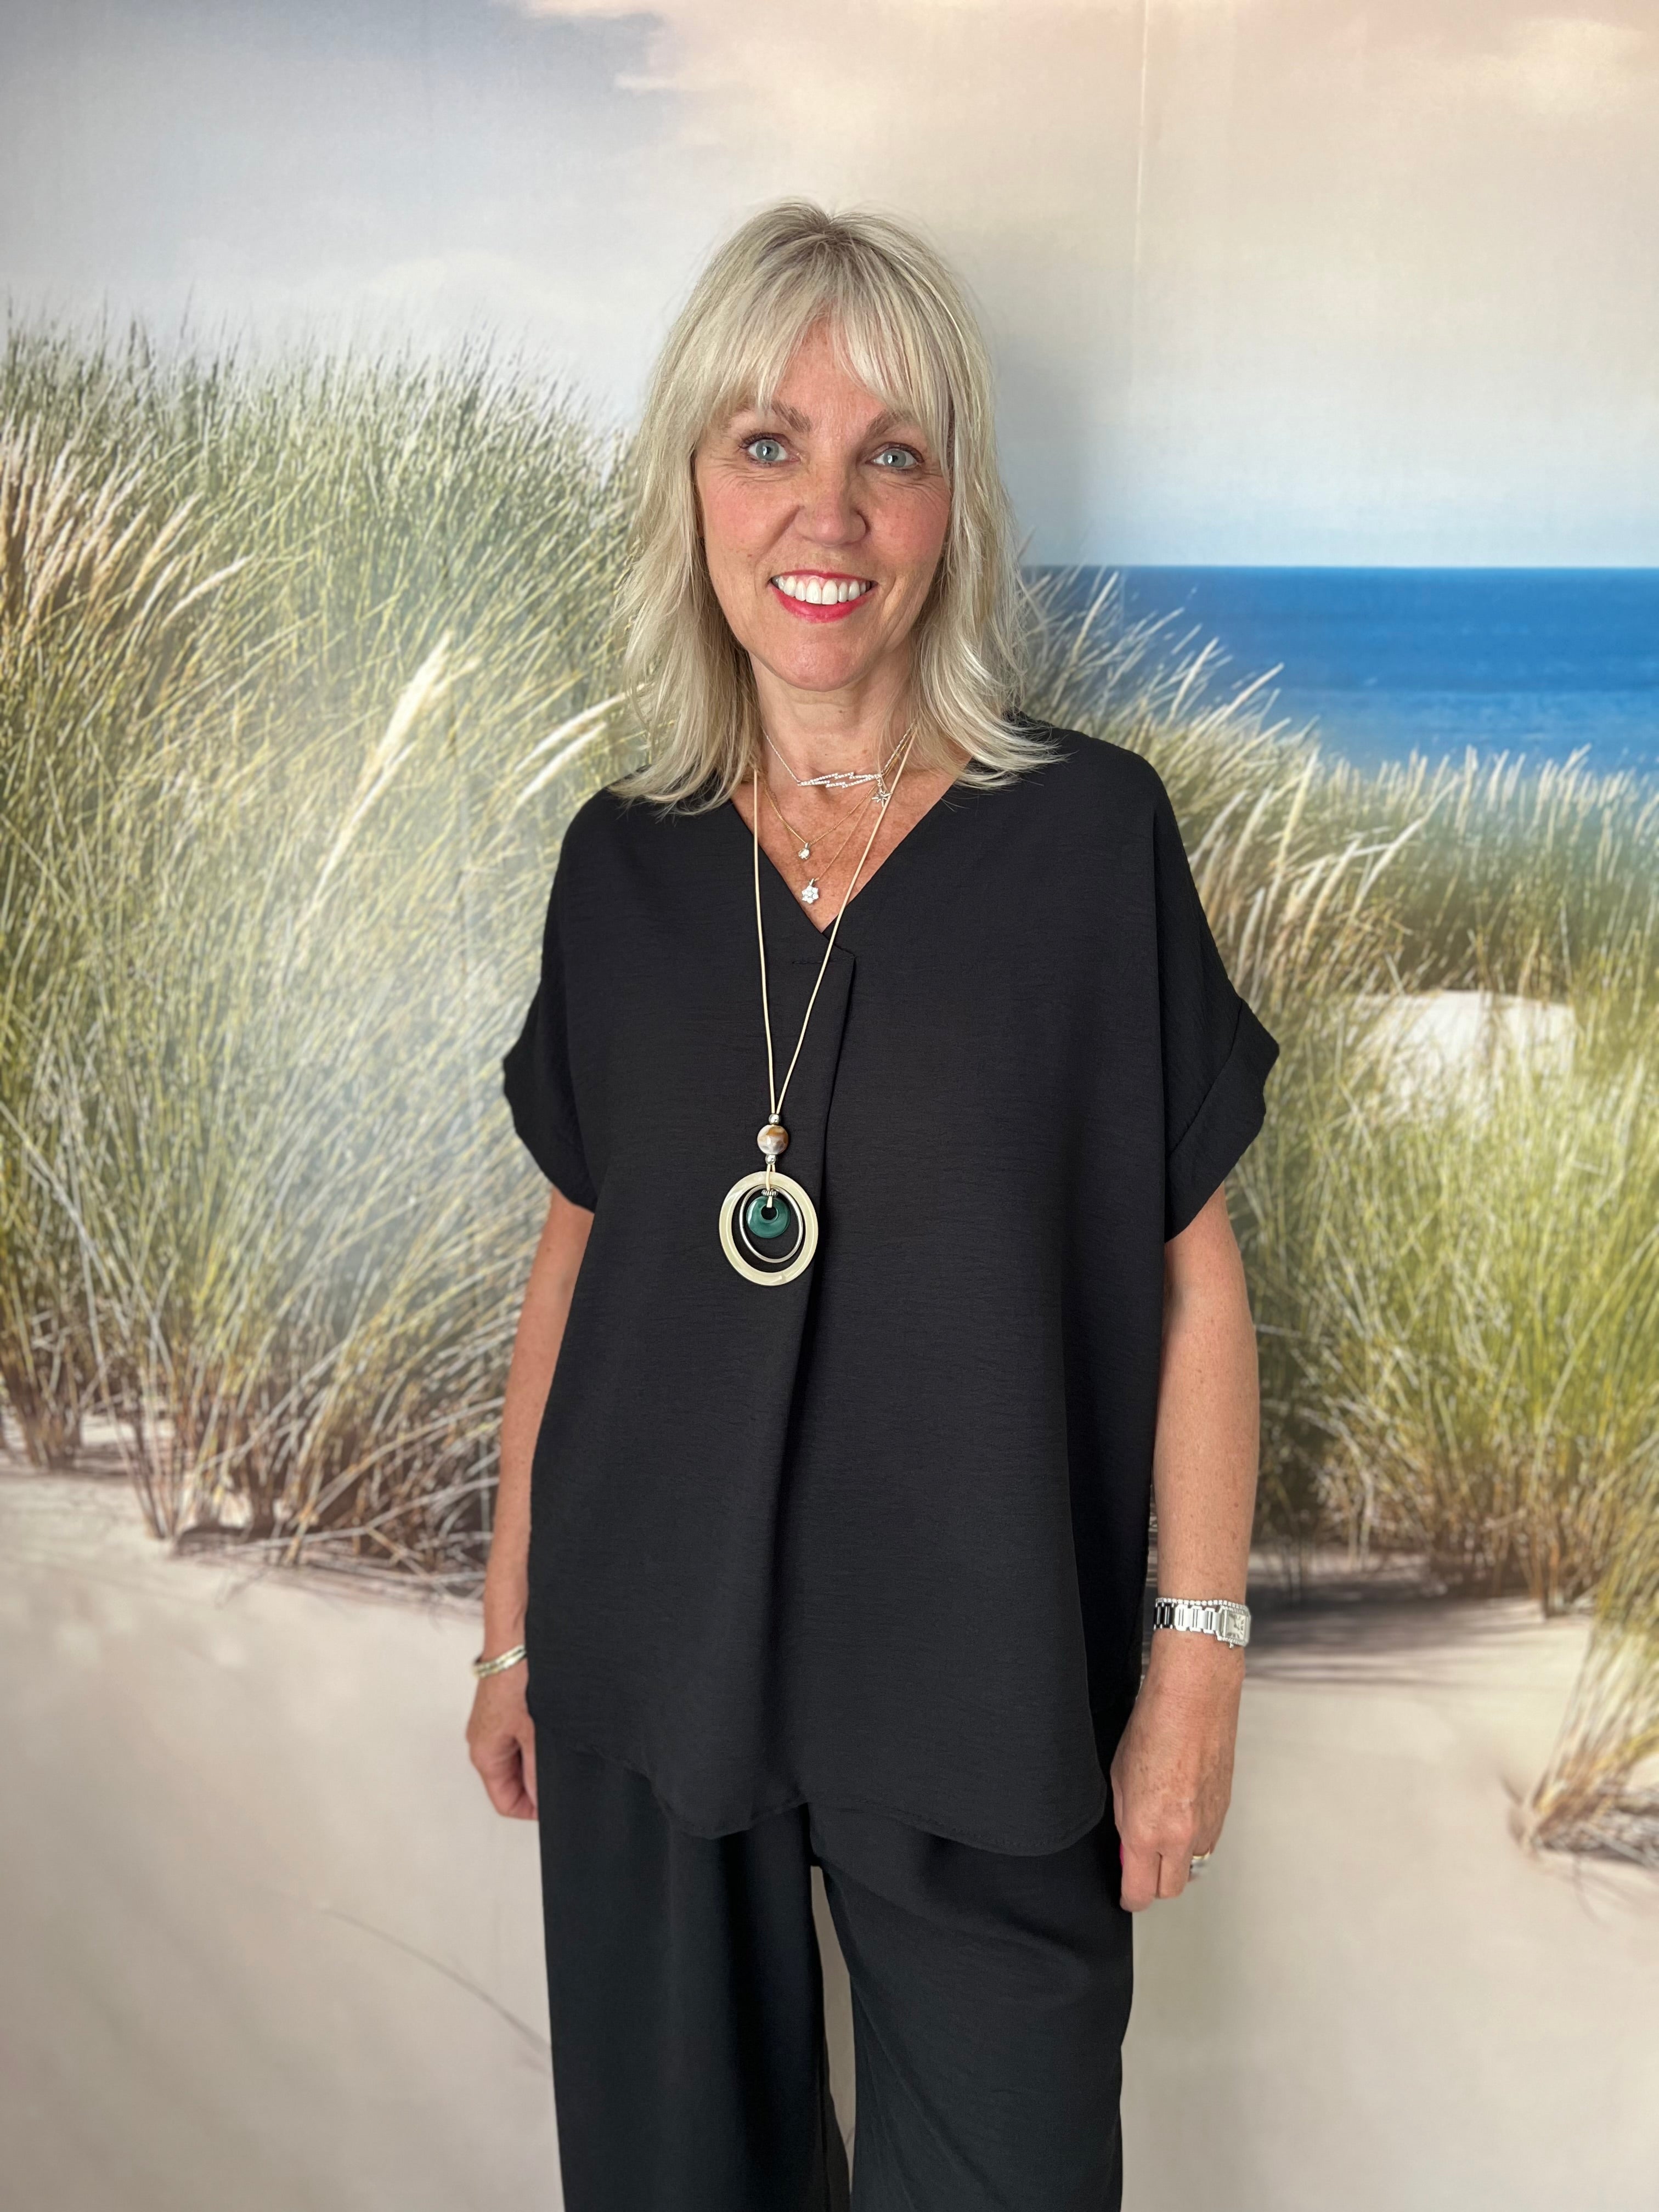 Crepe Top with Necklace in Black